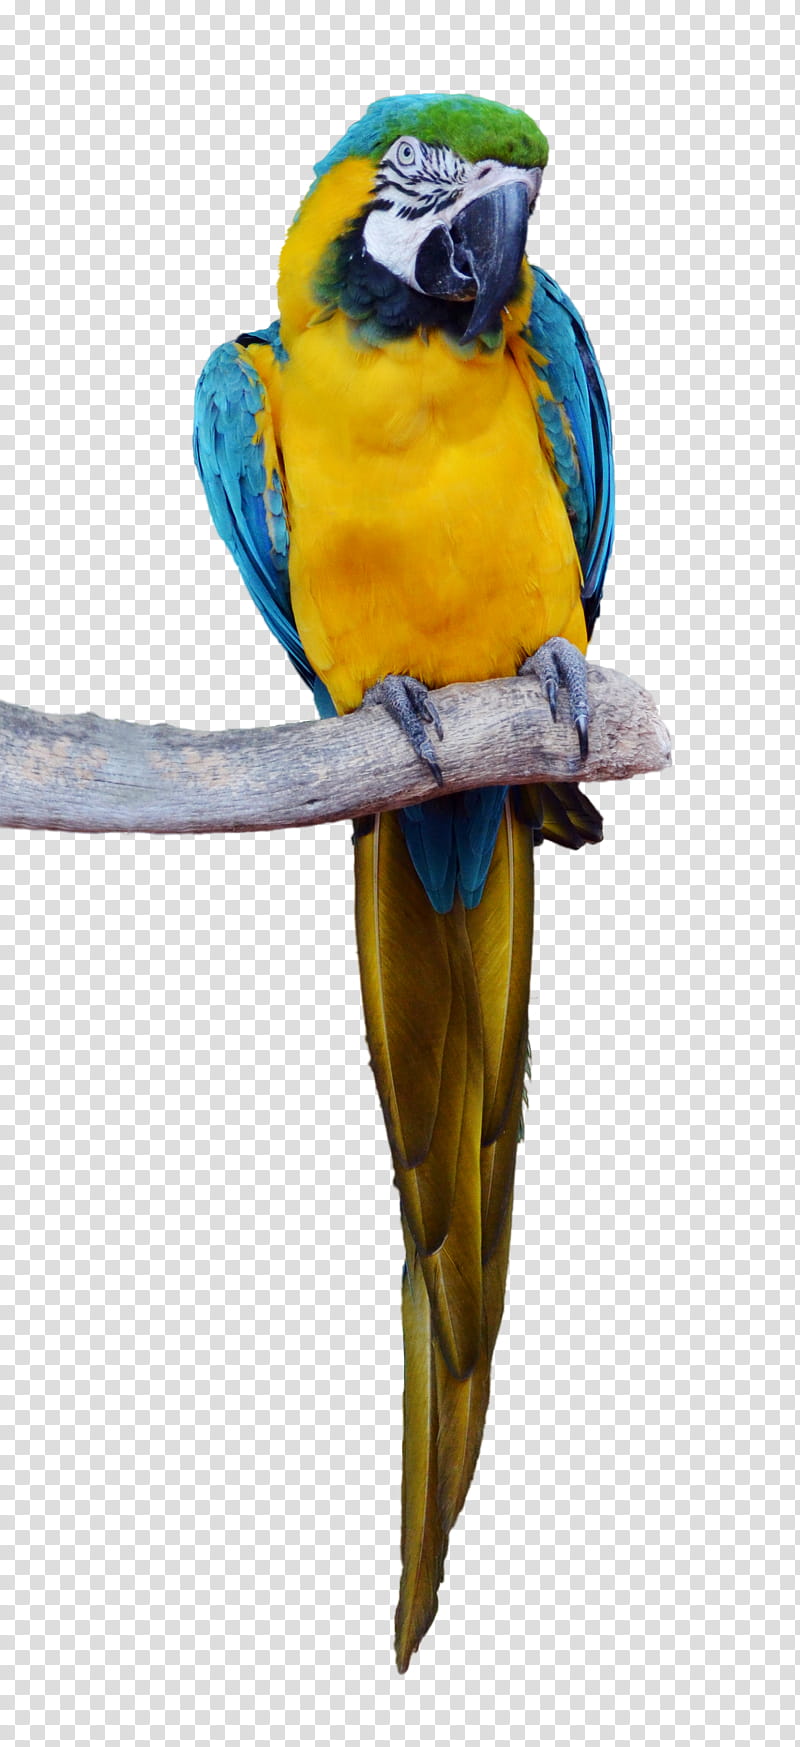 Tropical Parrot , parrot perched on branch transparent background PNG clipart